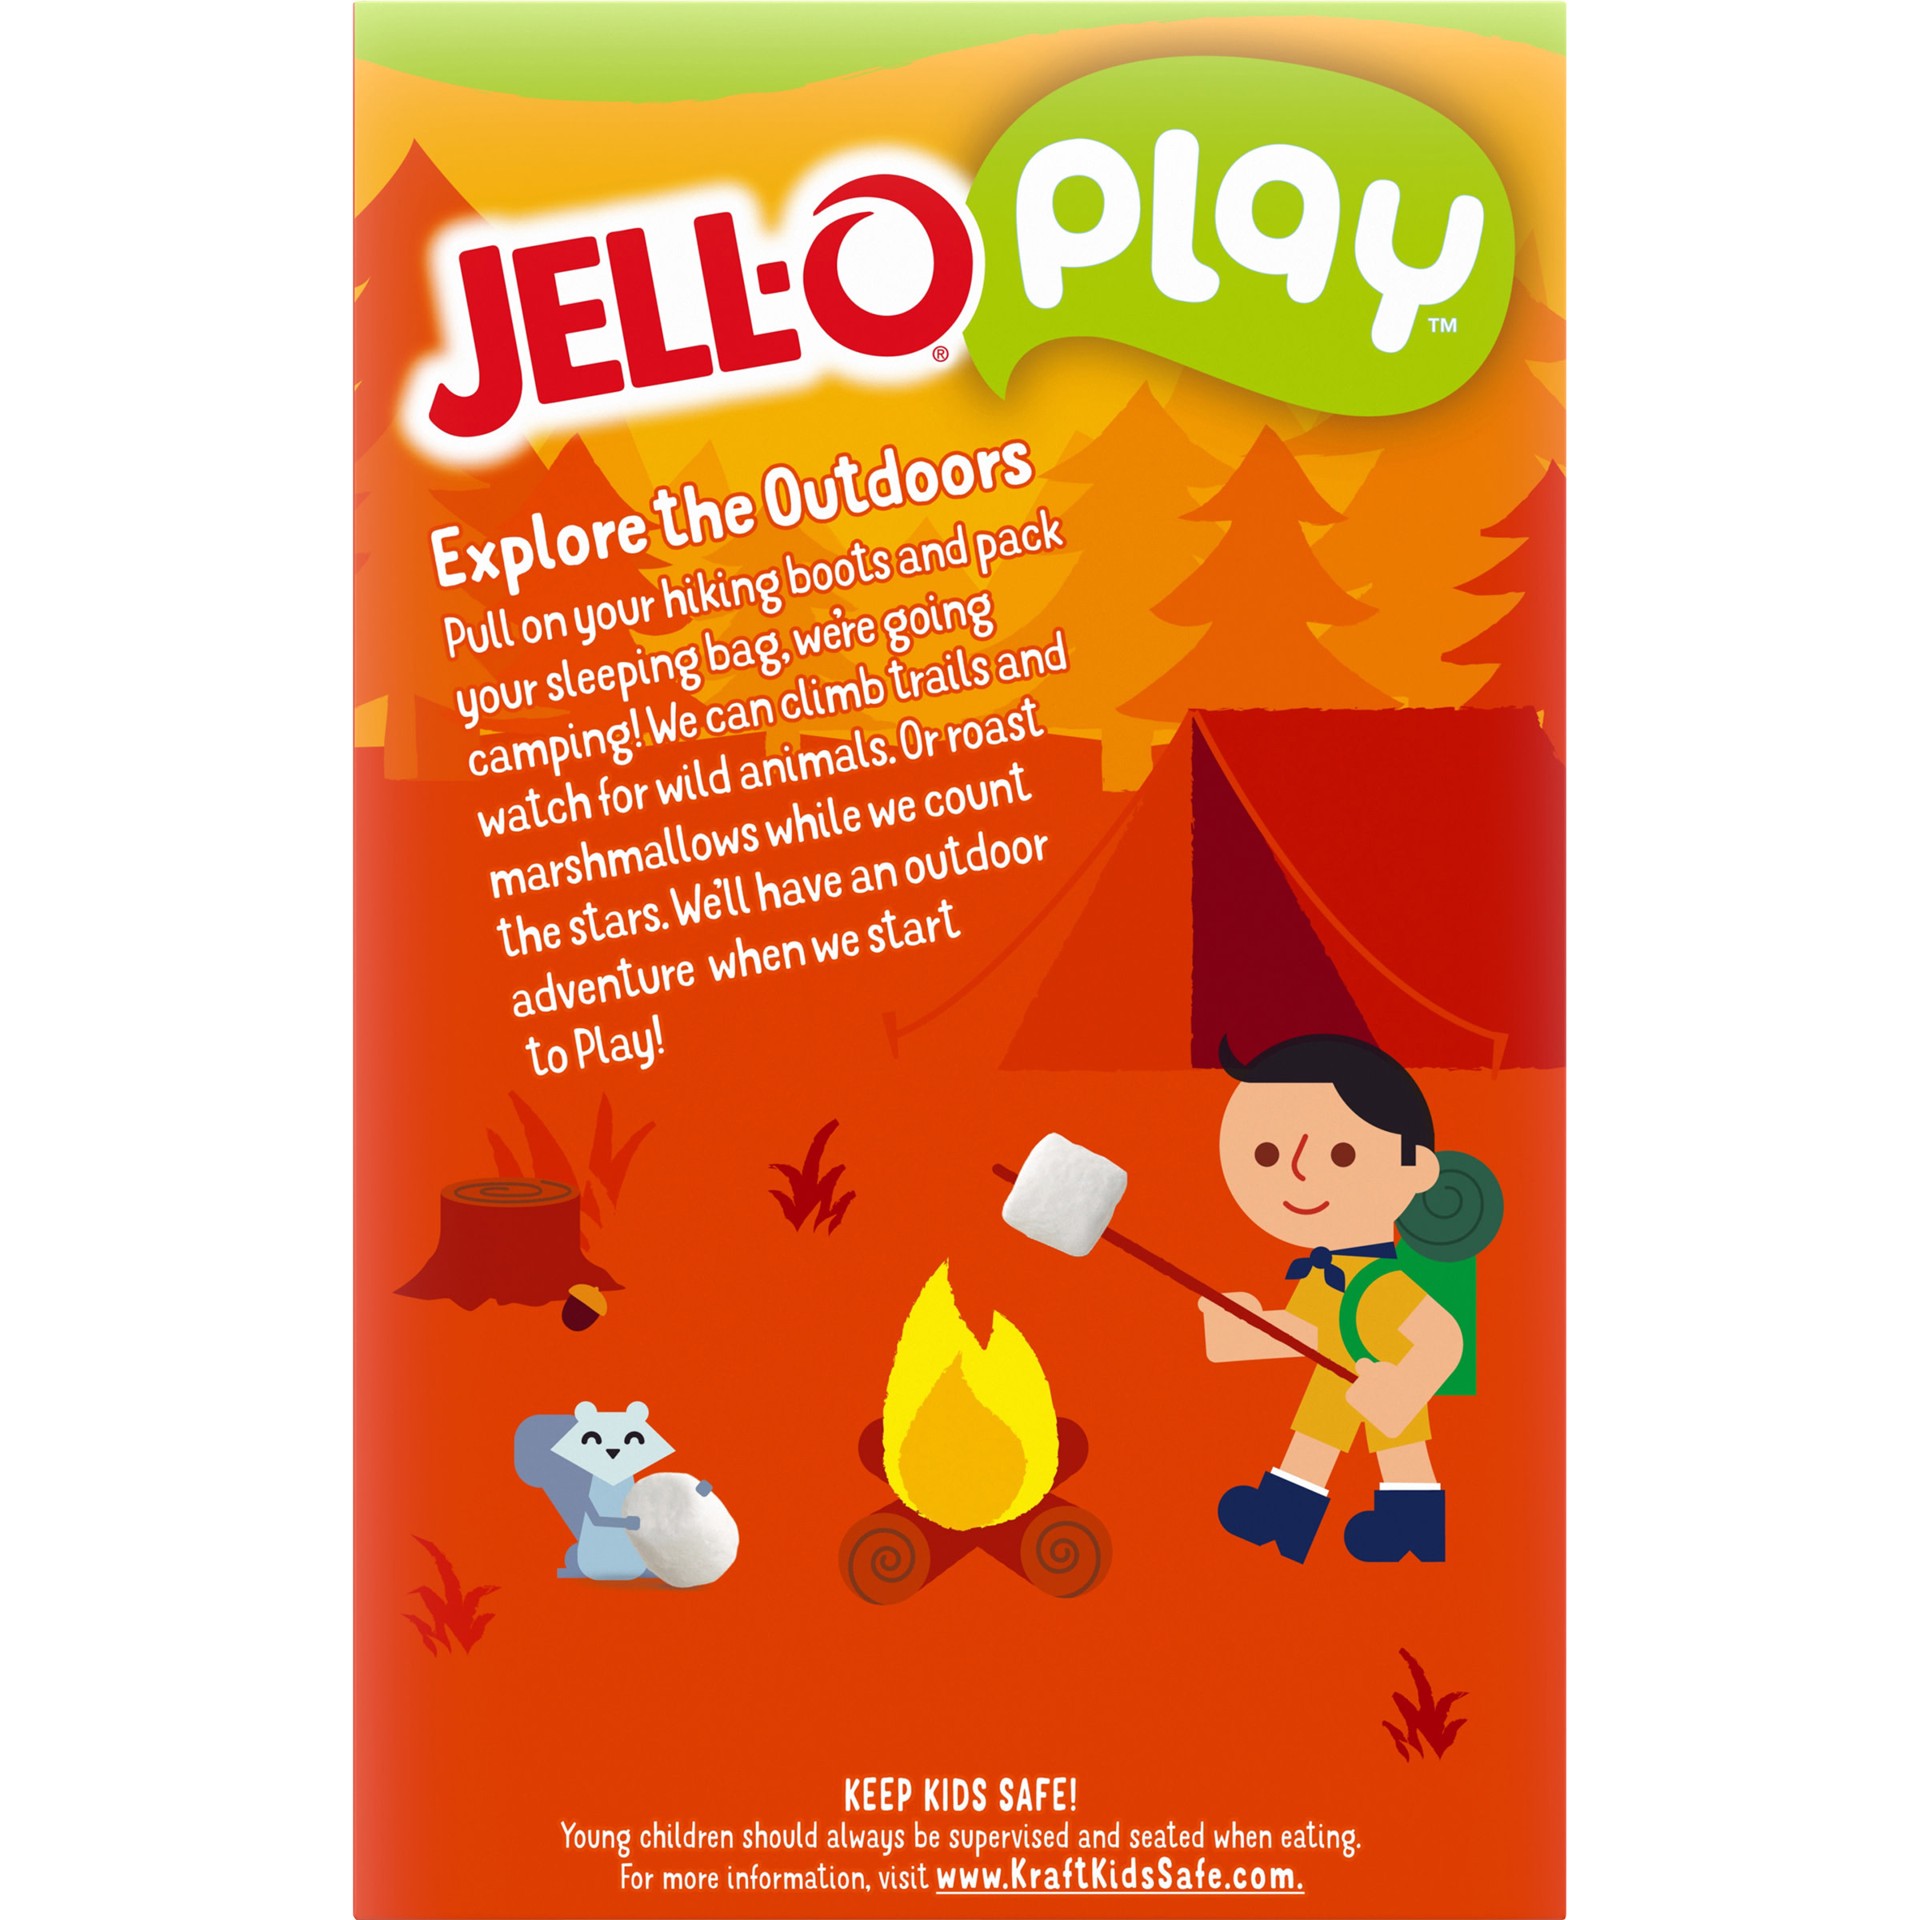 slide 8 of 11, Jell-O Play Camping Dessert Kit with Chocolate Pudding Mix, Graham Crumbs & Jet-Puffed Marshmallow Bits, 8.4 oz Box, 8.4 oz